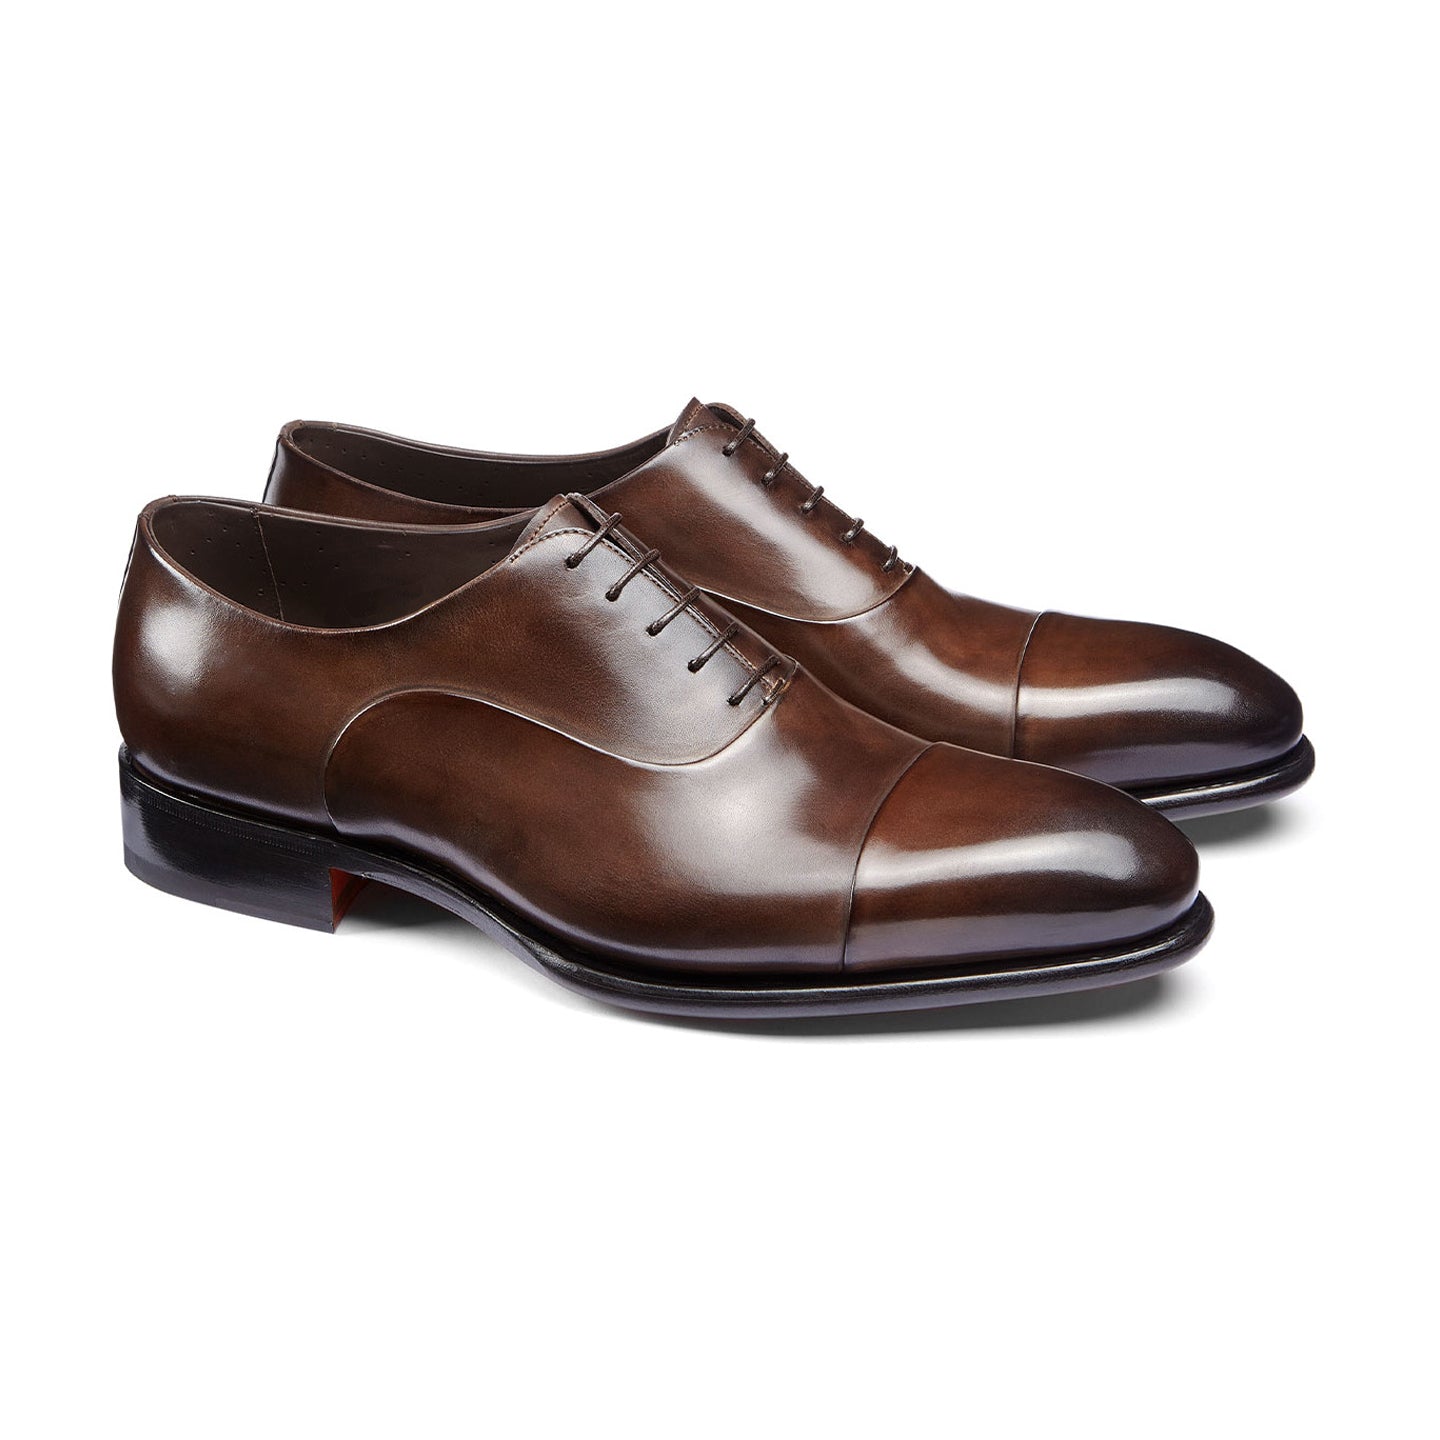 Brown Leather Woodford Balmoral Toe Cap Oxfords - Formal Shoes ...